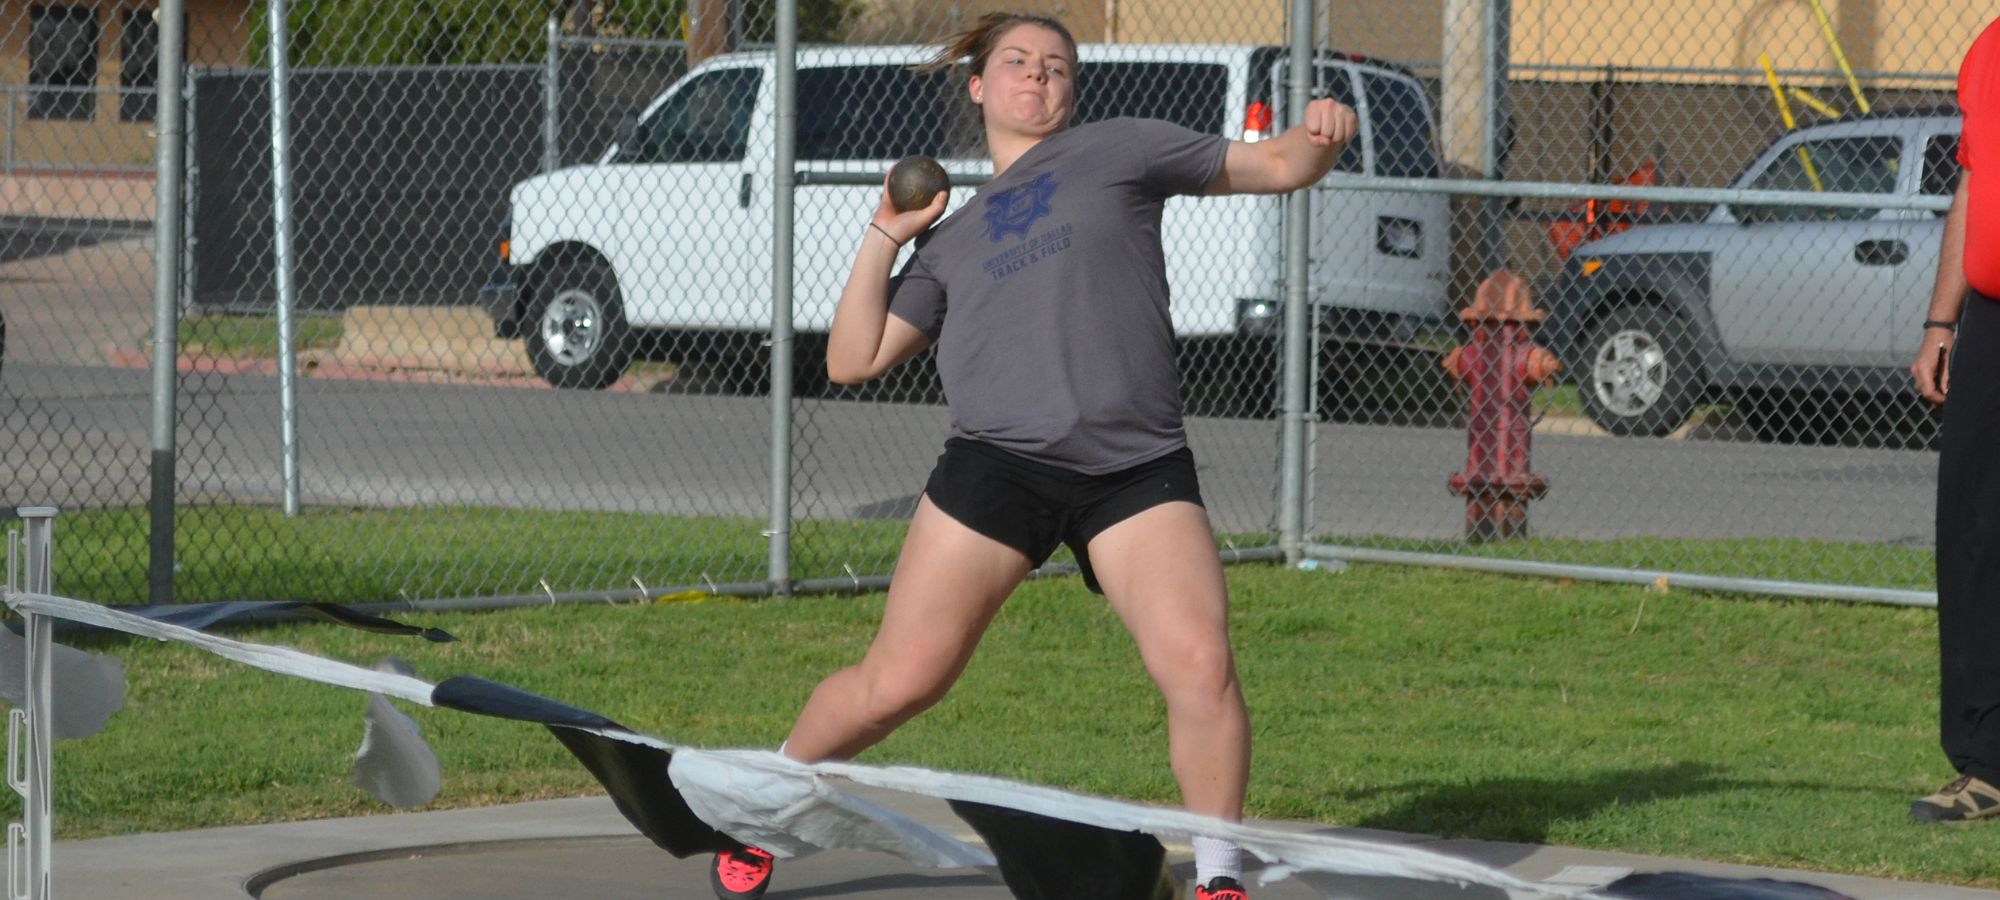 Hassink holds the UD Records for the Hammer Throw and Shot Put in her first season throwing with the track and field Team.